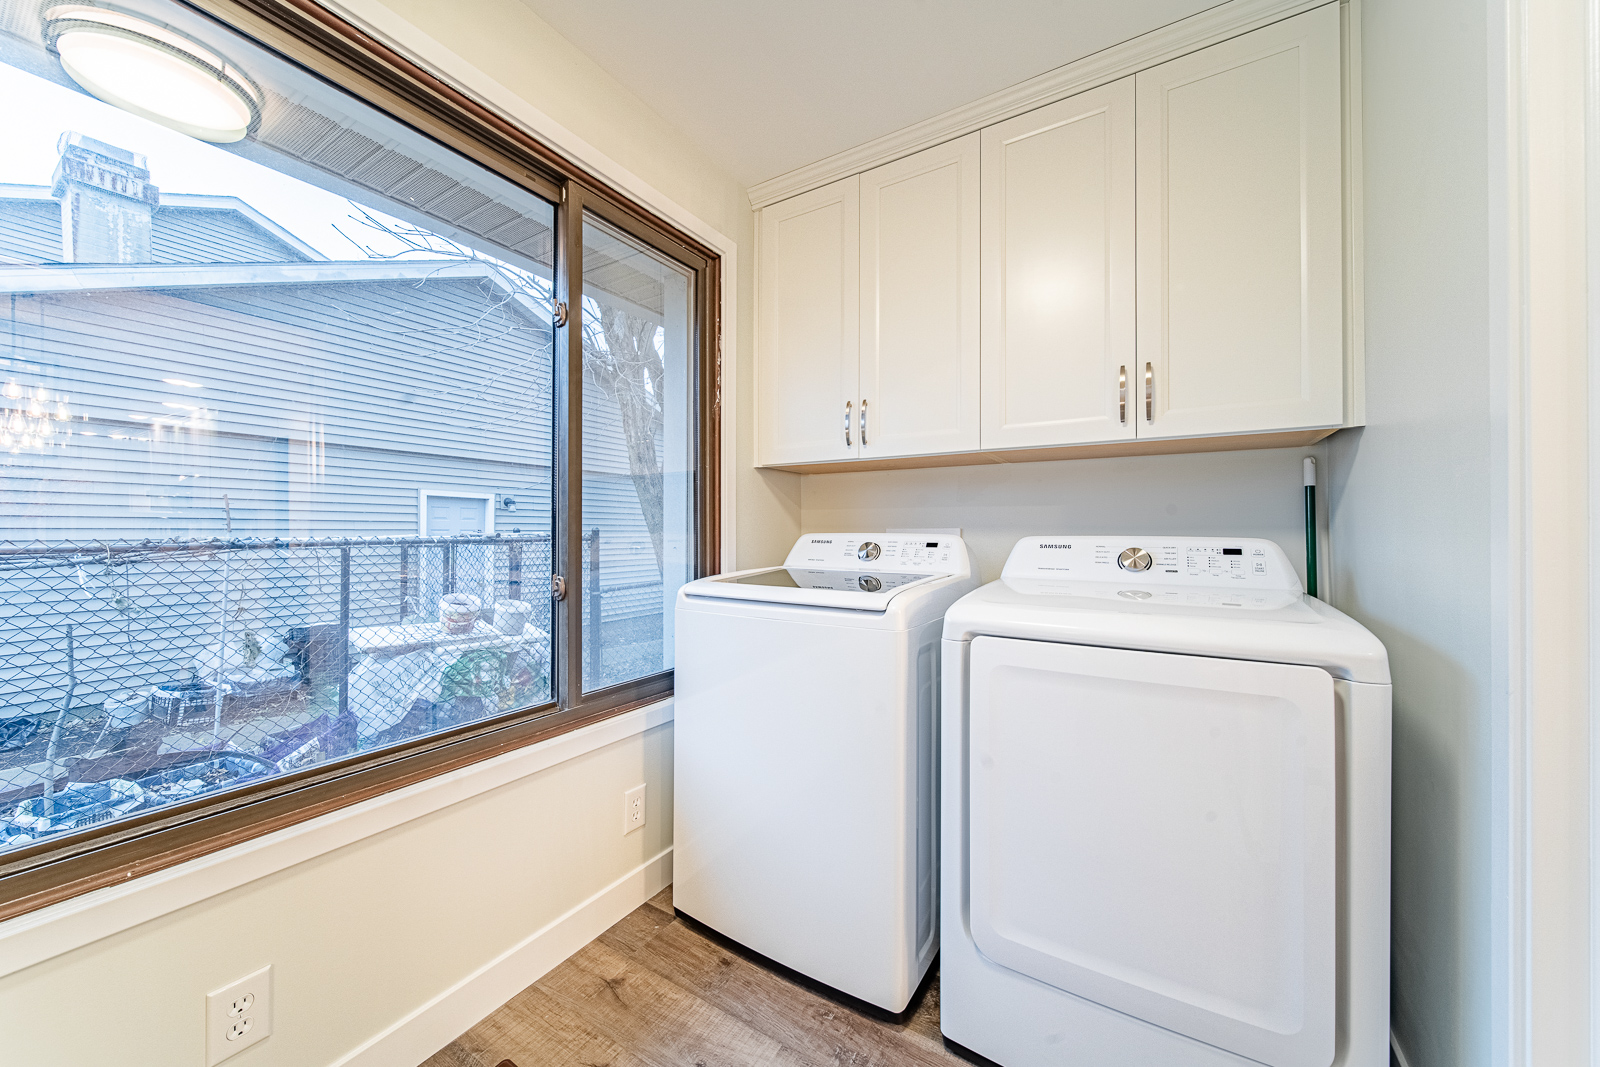 Compact and efficient laundry area in a Tippecanoe County home, part of a larger remodel.